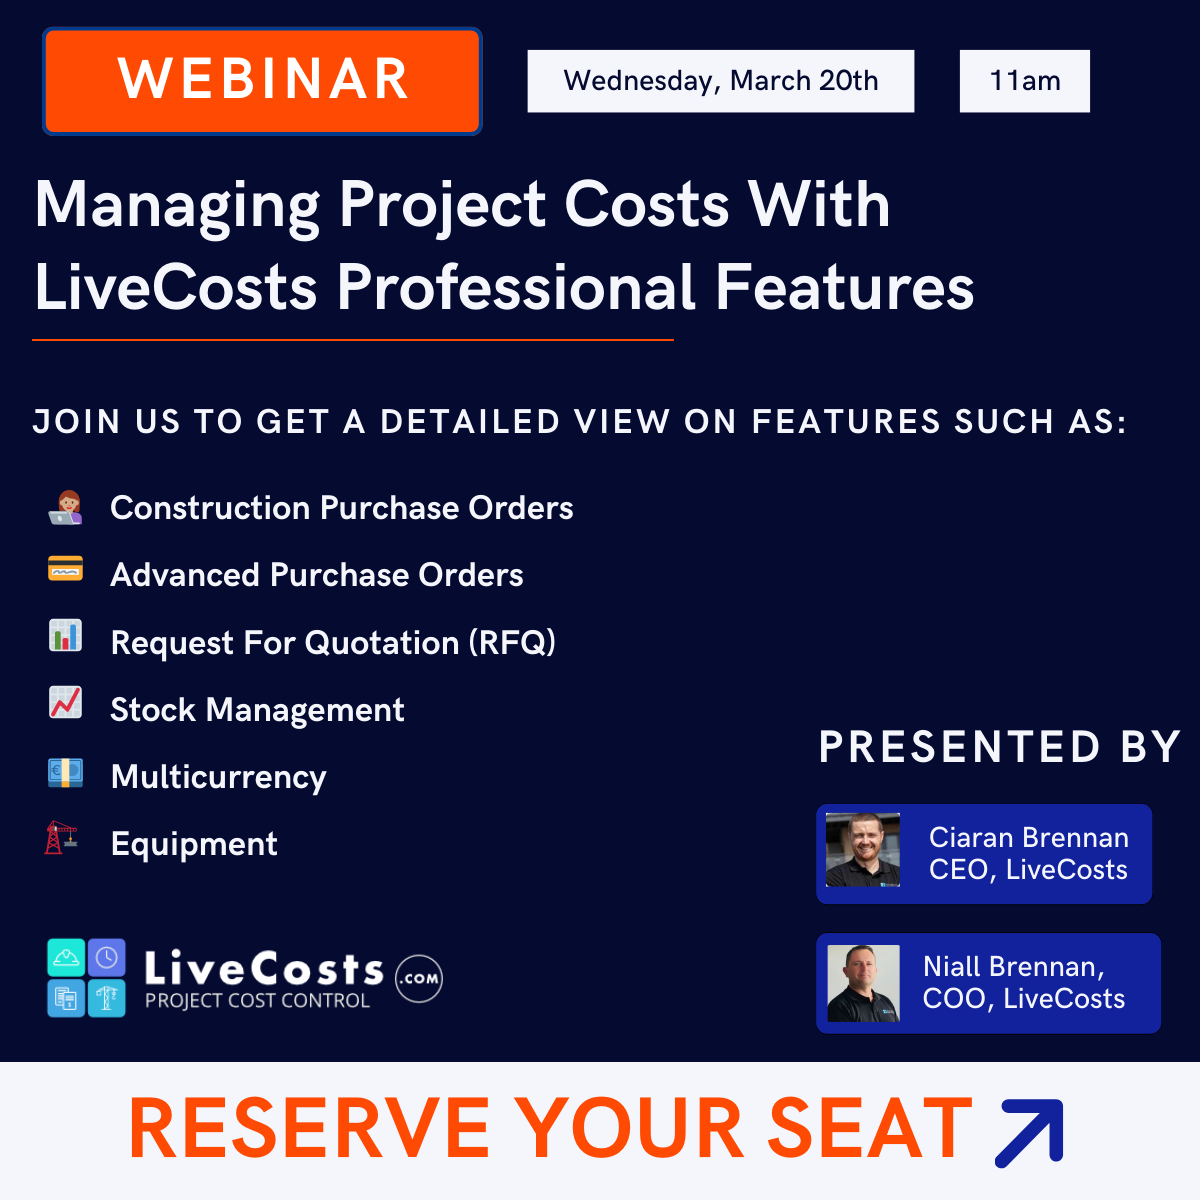 Managing Project Costs With LiveCosts Professional Features image